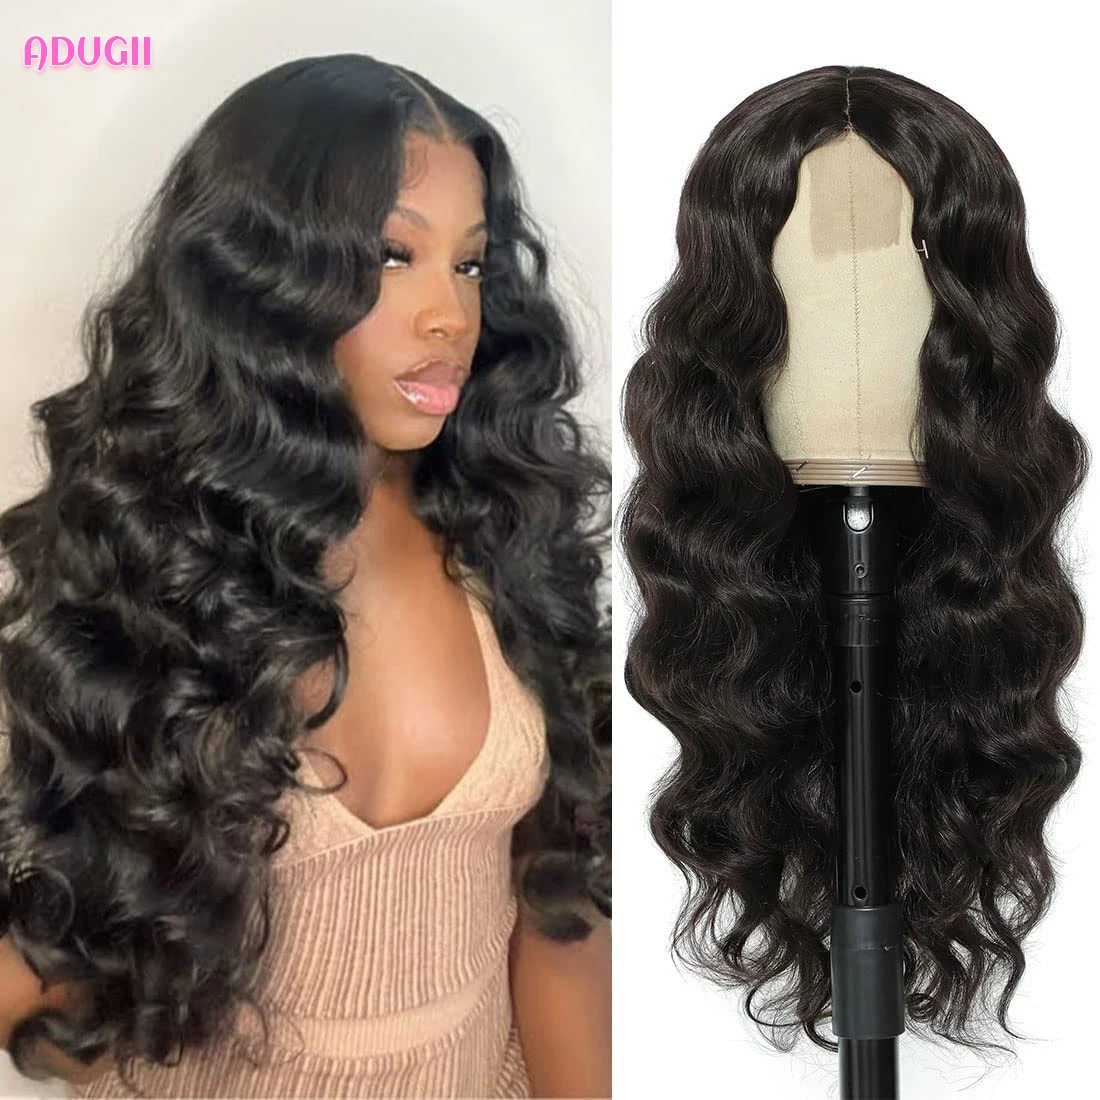 

Adugii 32 Inch 13x6 Body Wave Transparent Lace Front Human Hair Wigs For Women Brazilian Hair 13x4 Body Wave Wig With Baby Hair